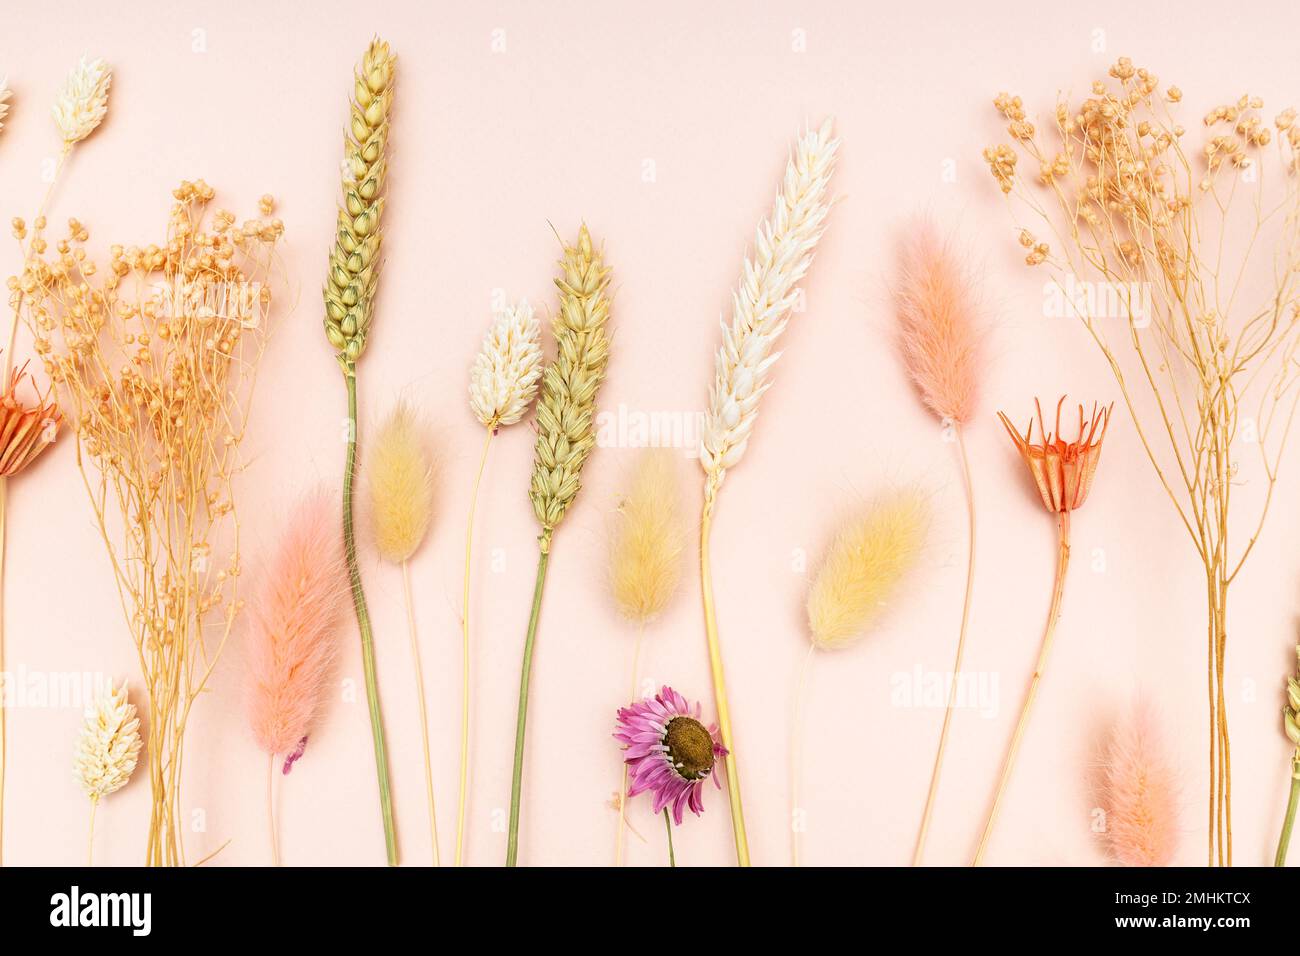 Dried Plants on Pink Pastel Background Close Up Stock Image - Image of  color, bundle: 267643607